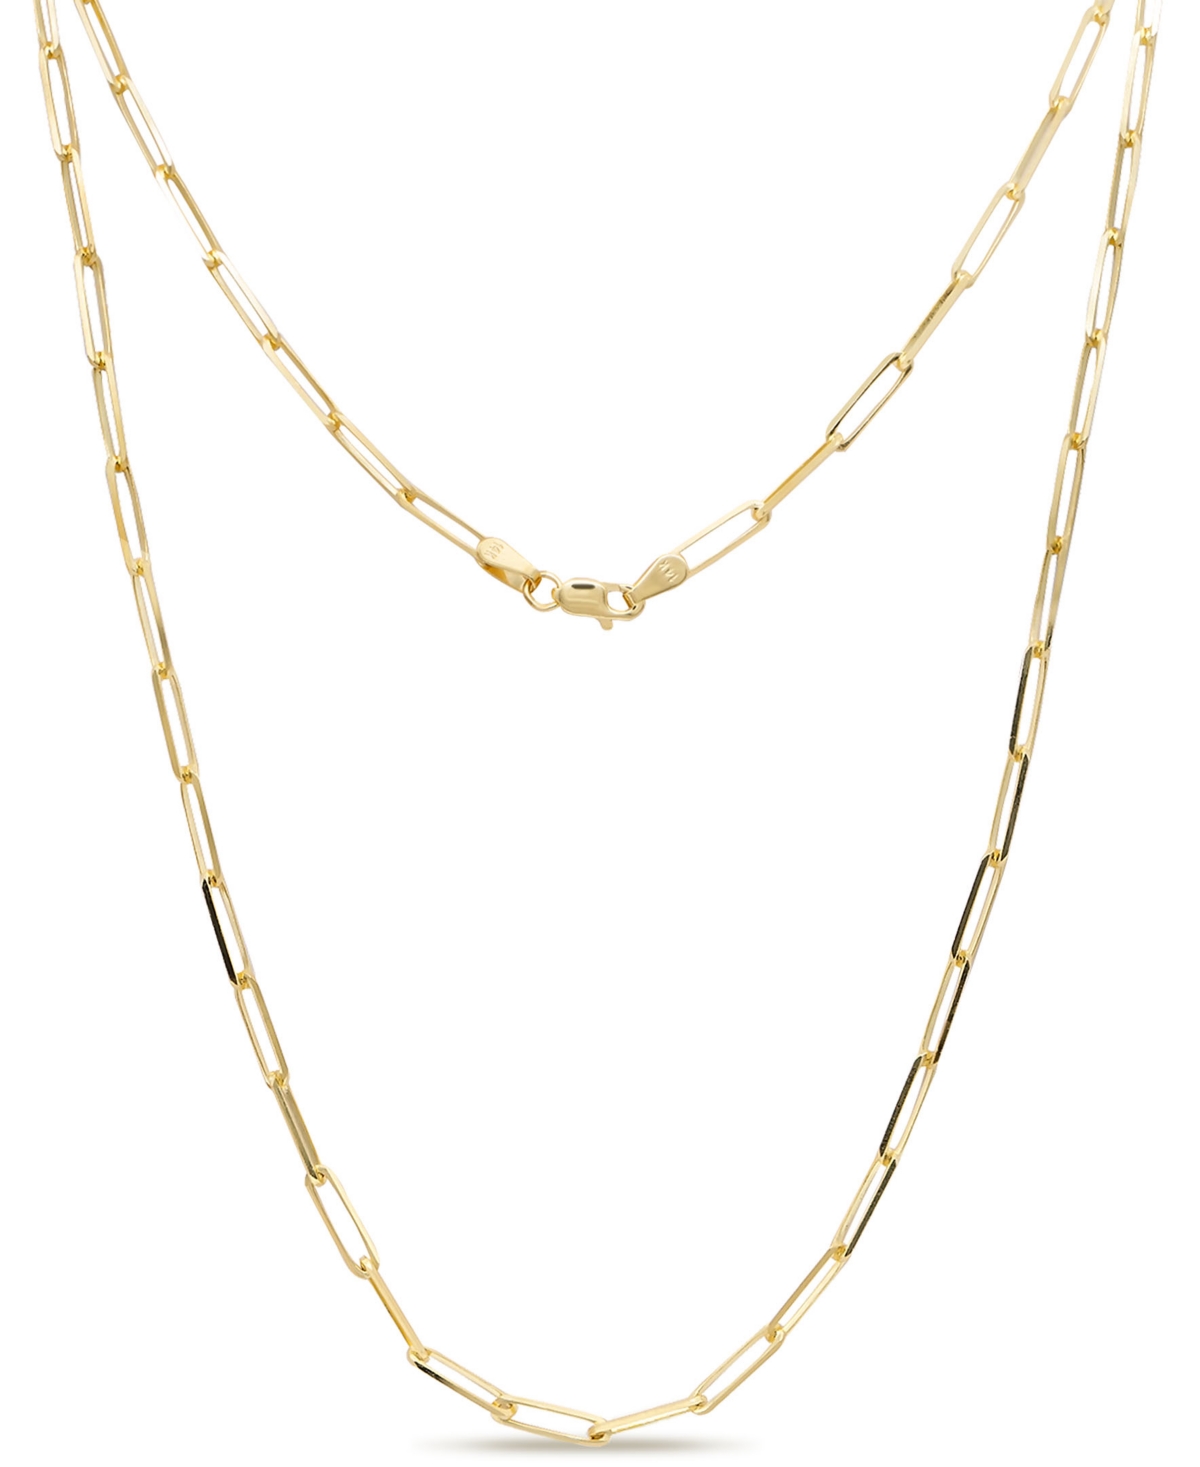 14K Gold Paperclip 2.8mm Chain Necklace, 18", approx. 4.9gr - Gold